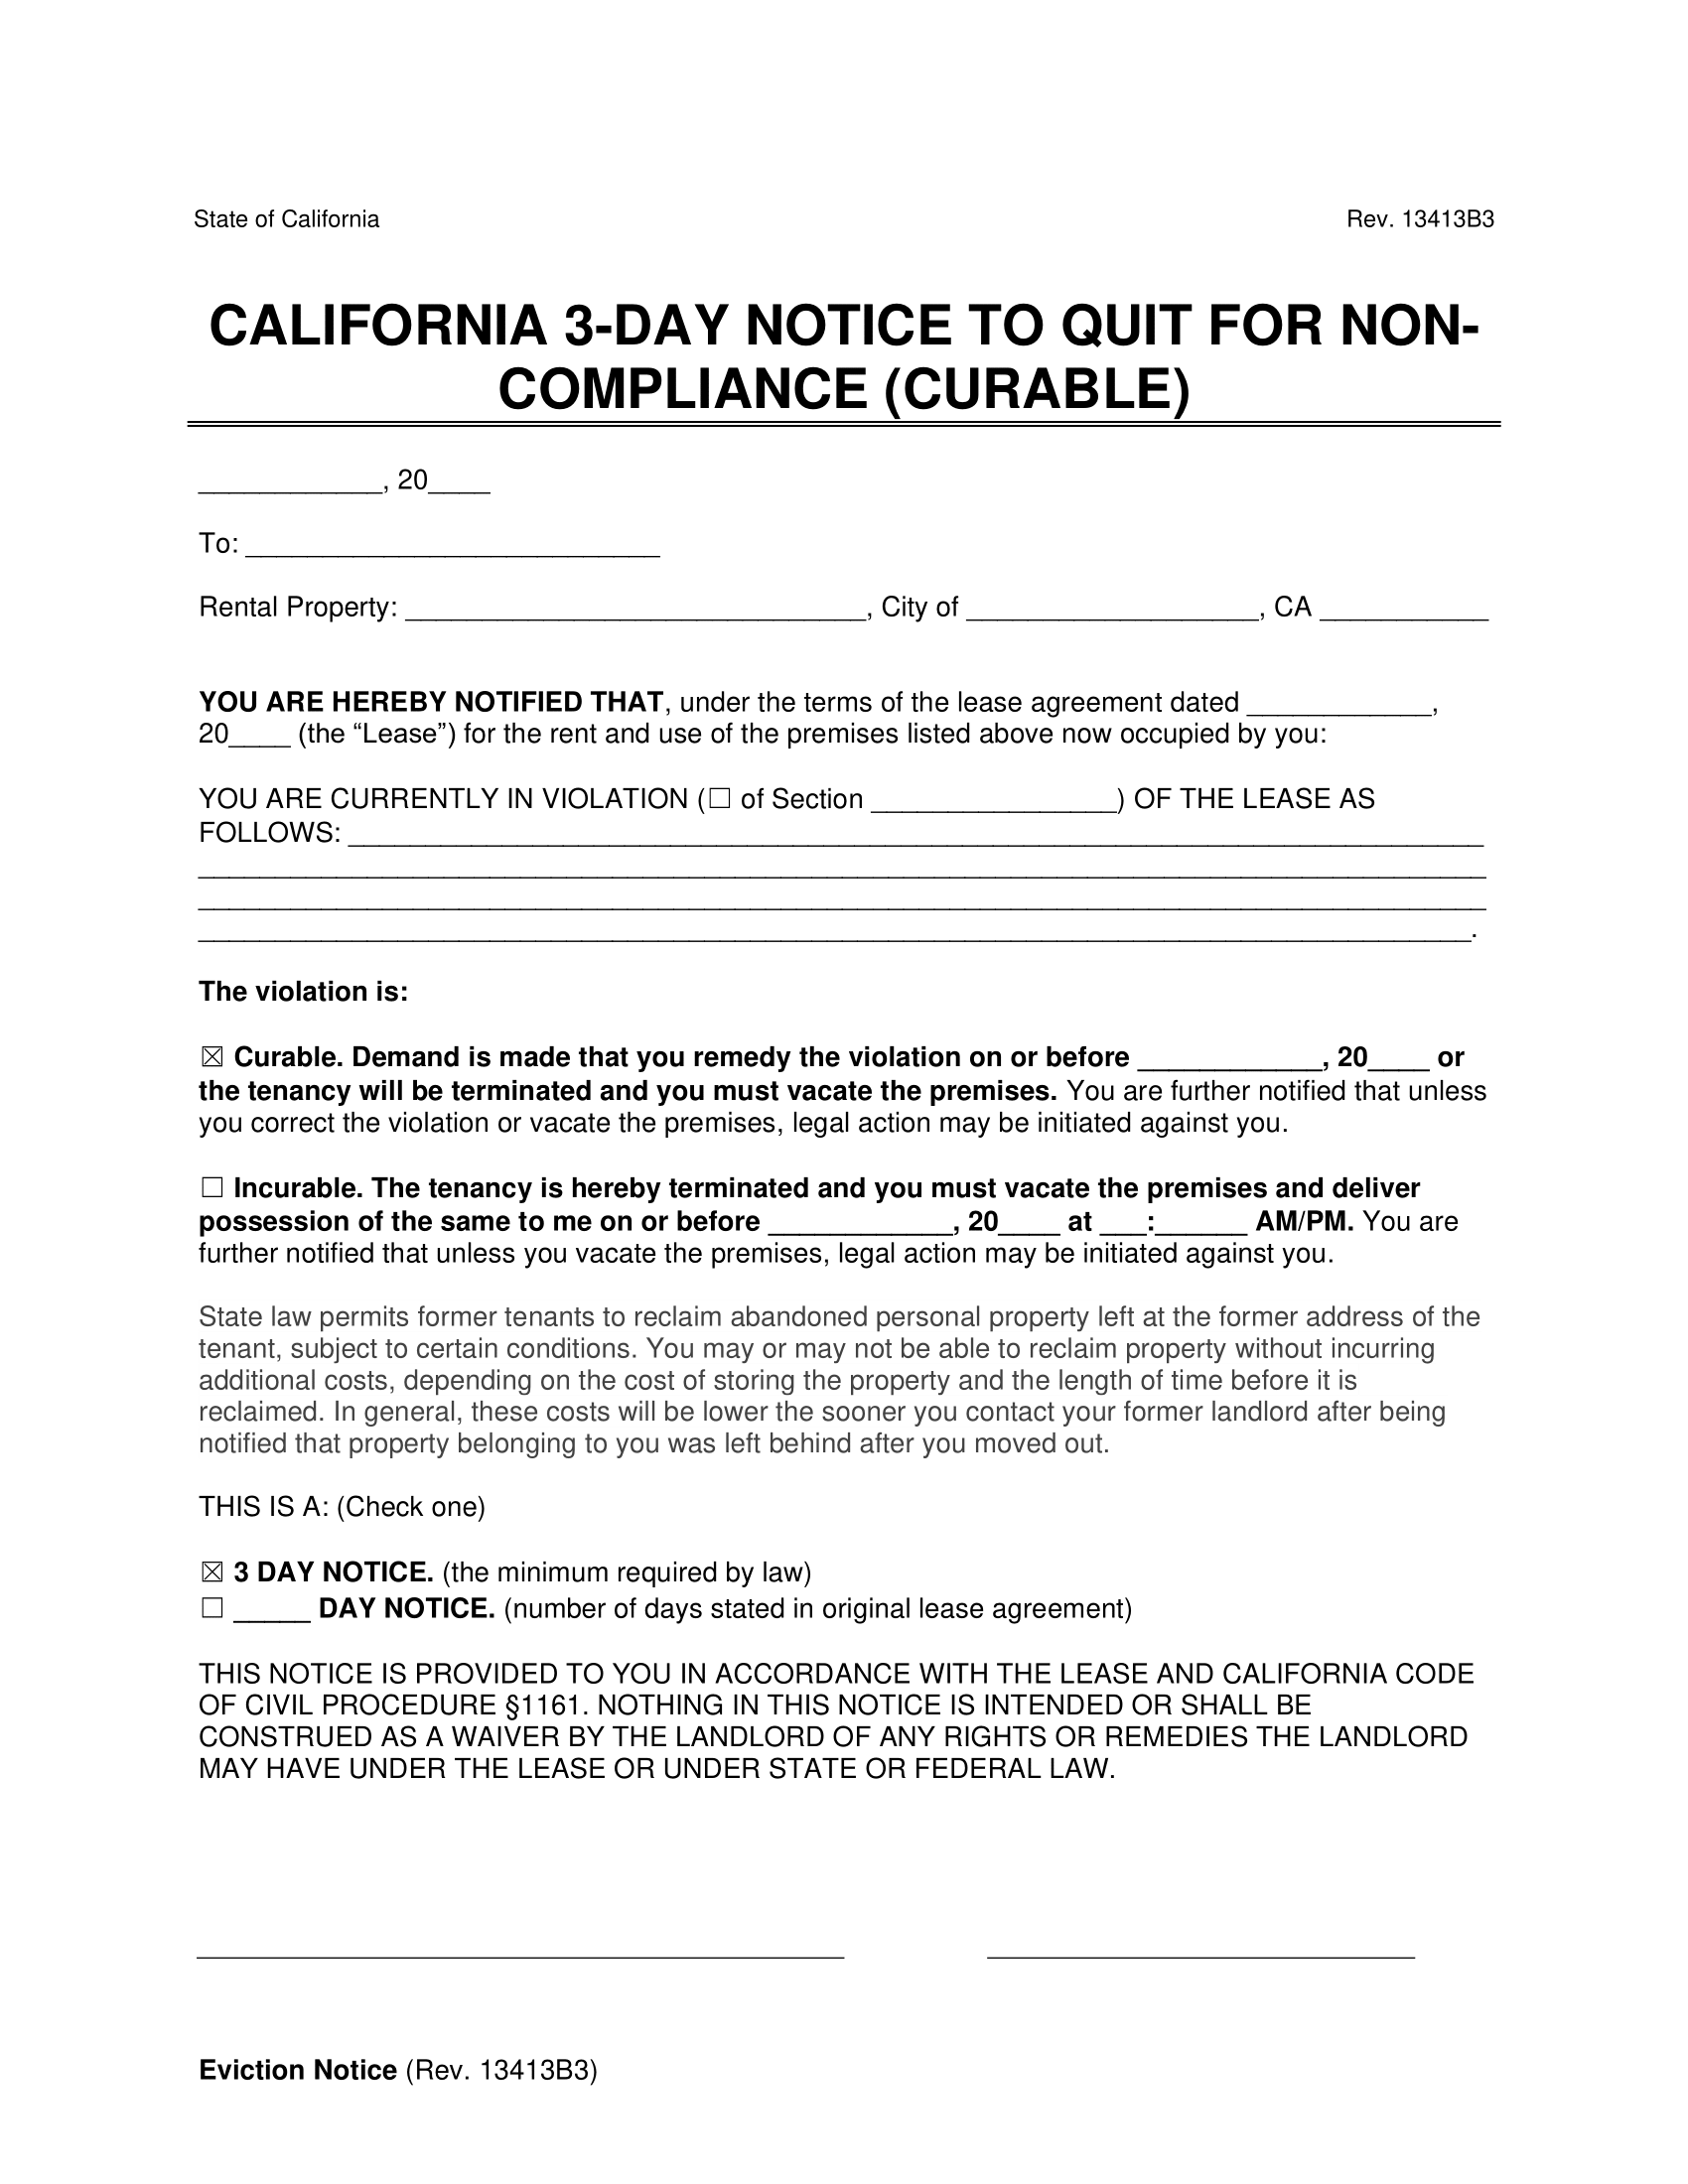 California 3-Day Notice to Quit for Curable Non-Compliance